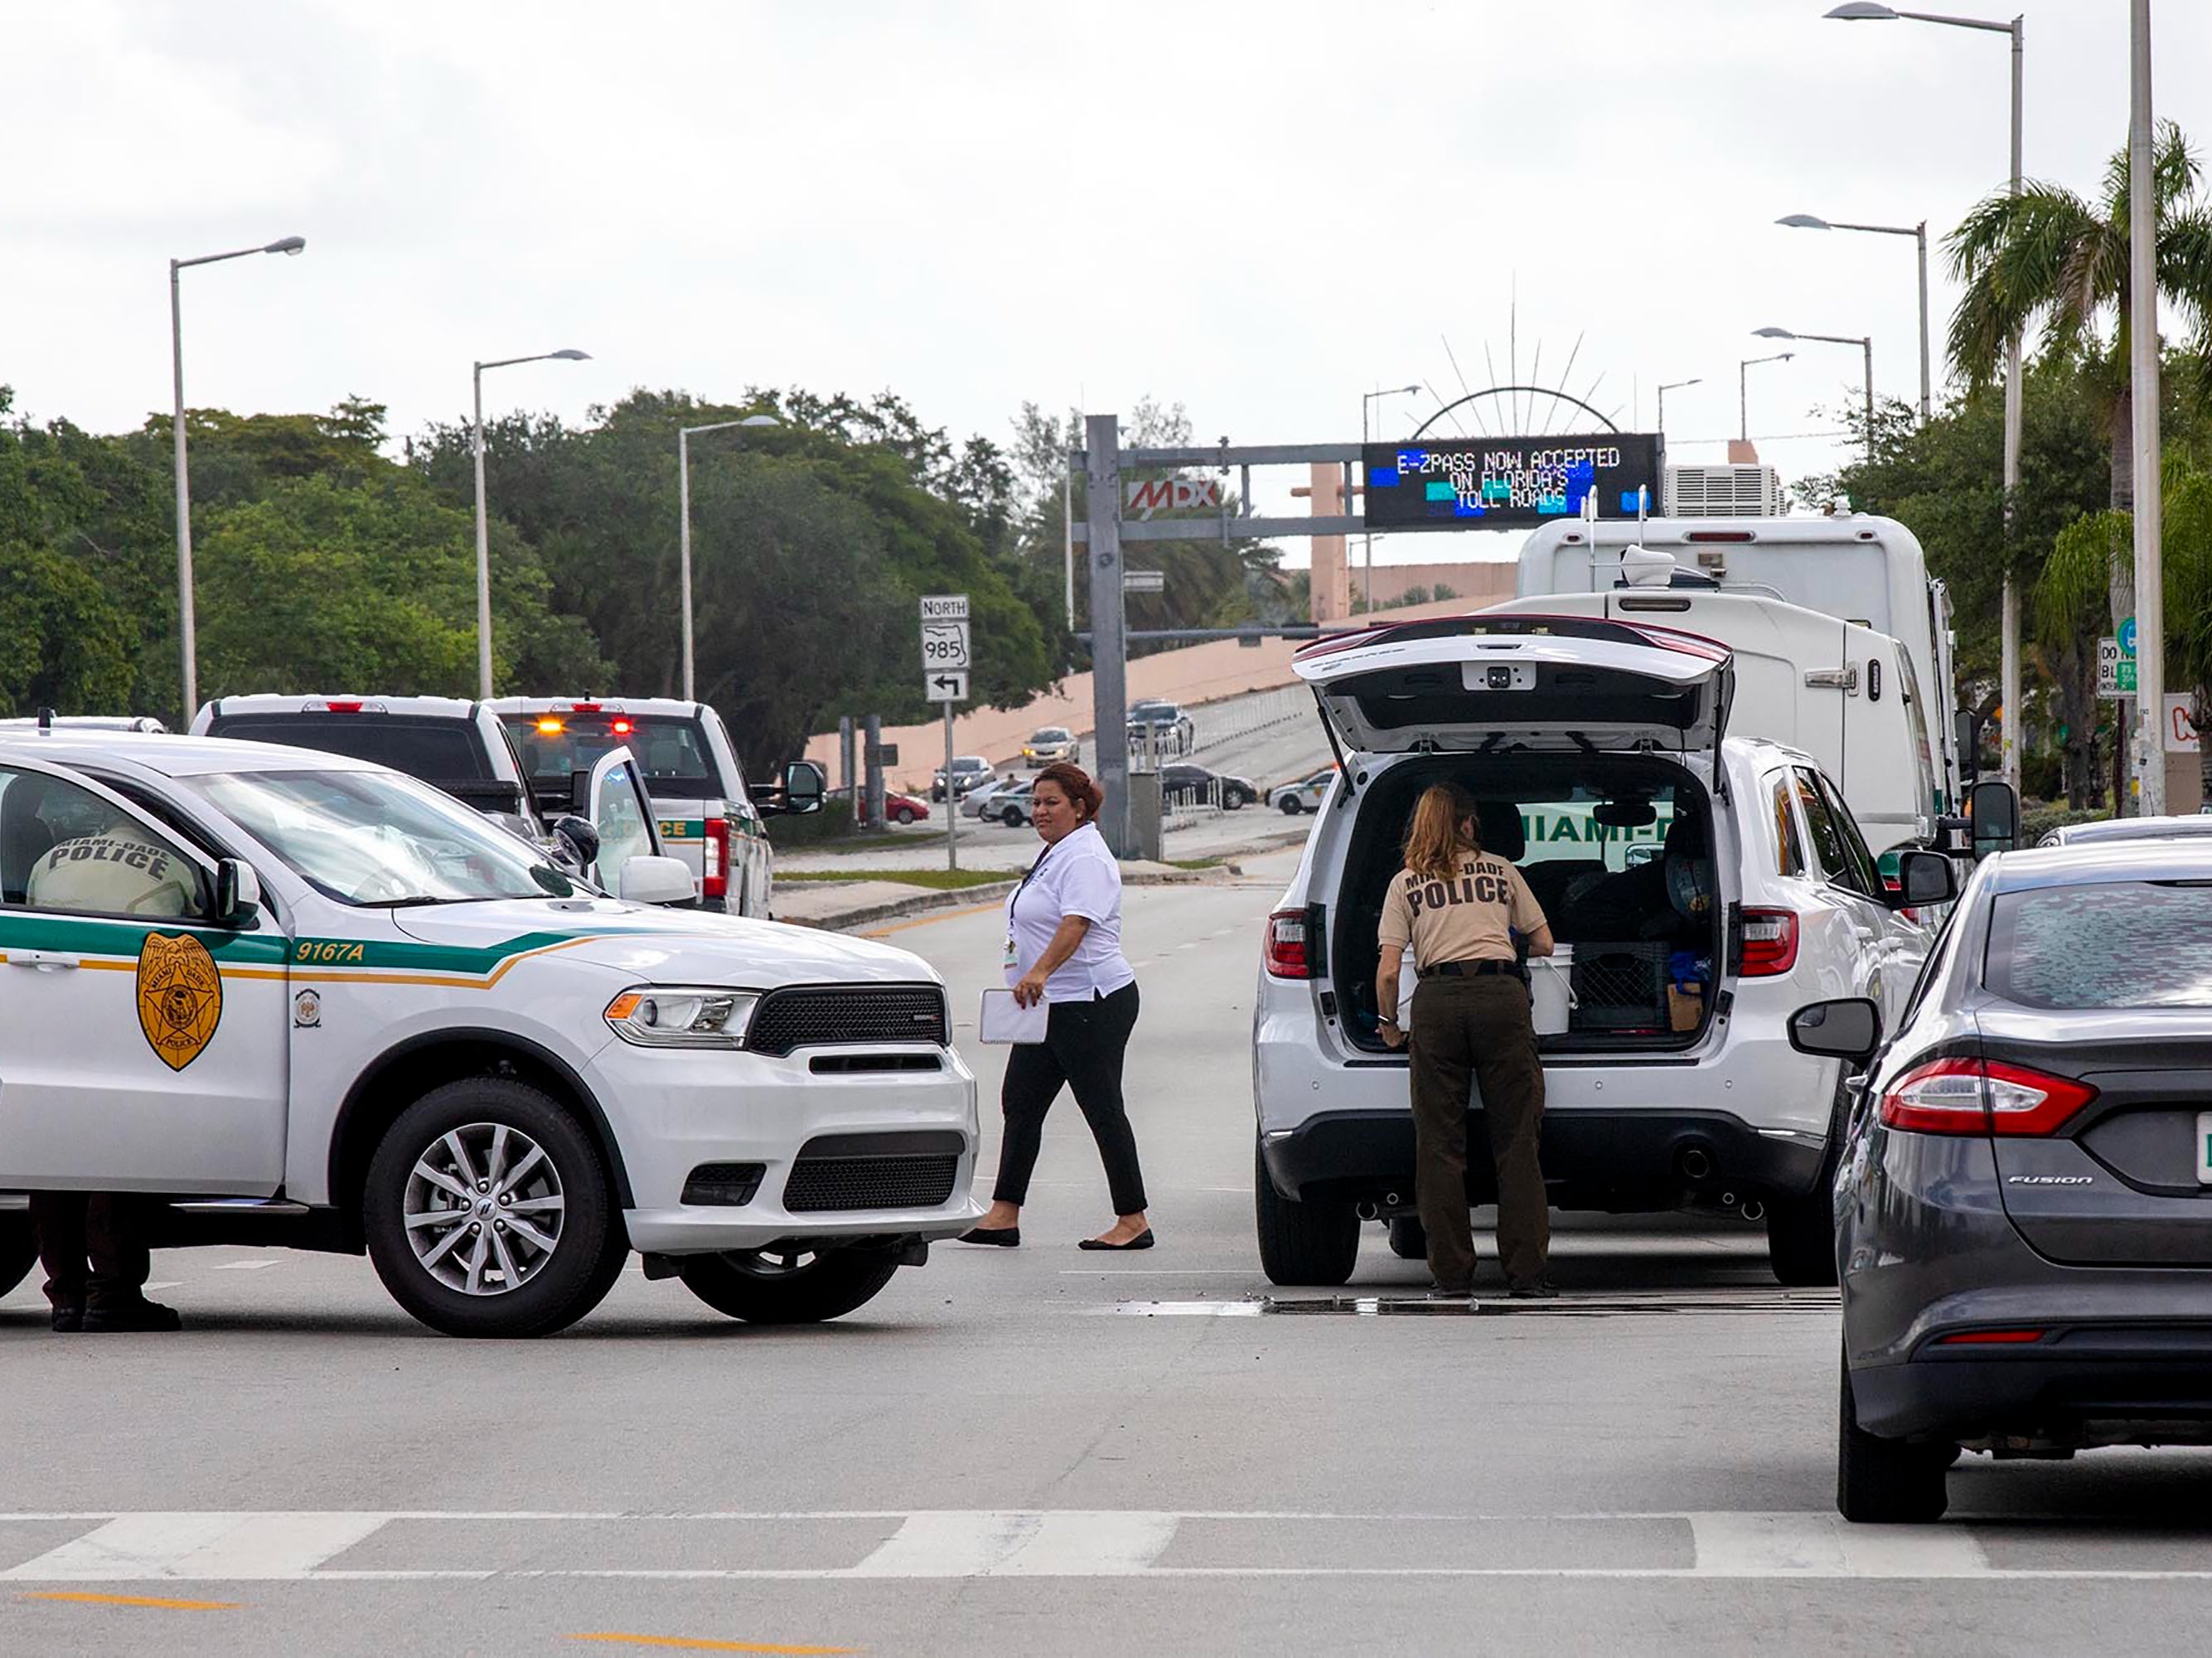 Police block an intersection near the Miami-Dade Kendall Campus in Miami, Fla., on Sunday, June 6, 2021.